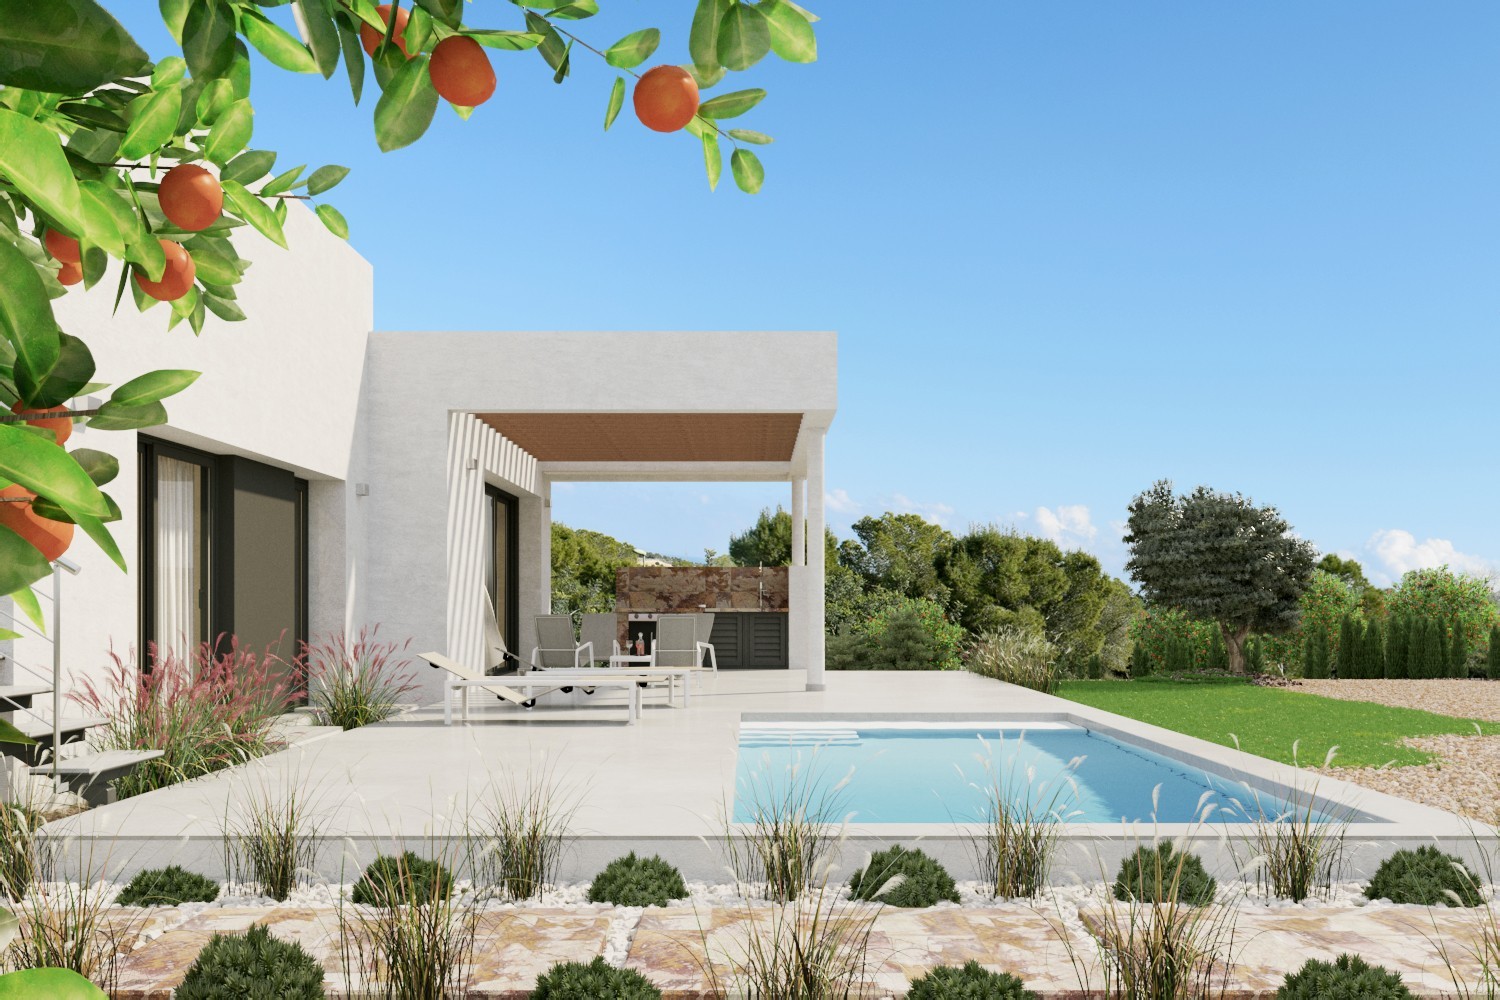 If you want to live in a natural paradise with all the comforts, visit the Mandarino Development: New build villas for sale in Las Colinas Golf